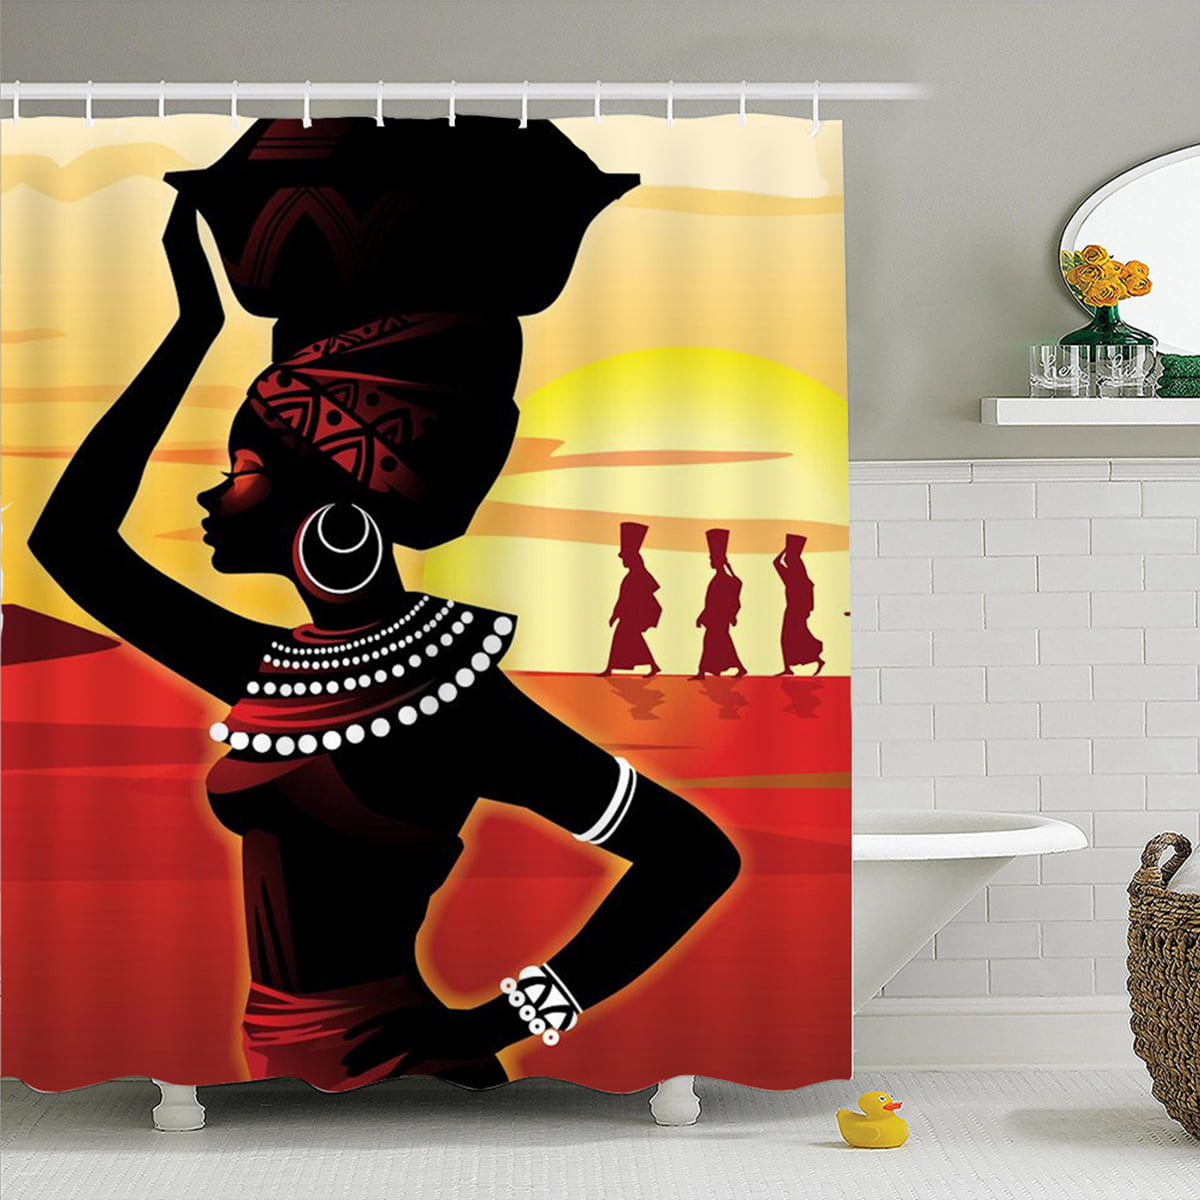 A Africa Lion's Portrait Shower Curtain Set Bathroom Polyester Waterpoof Fabric 